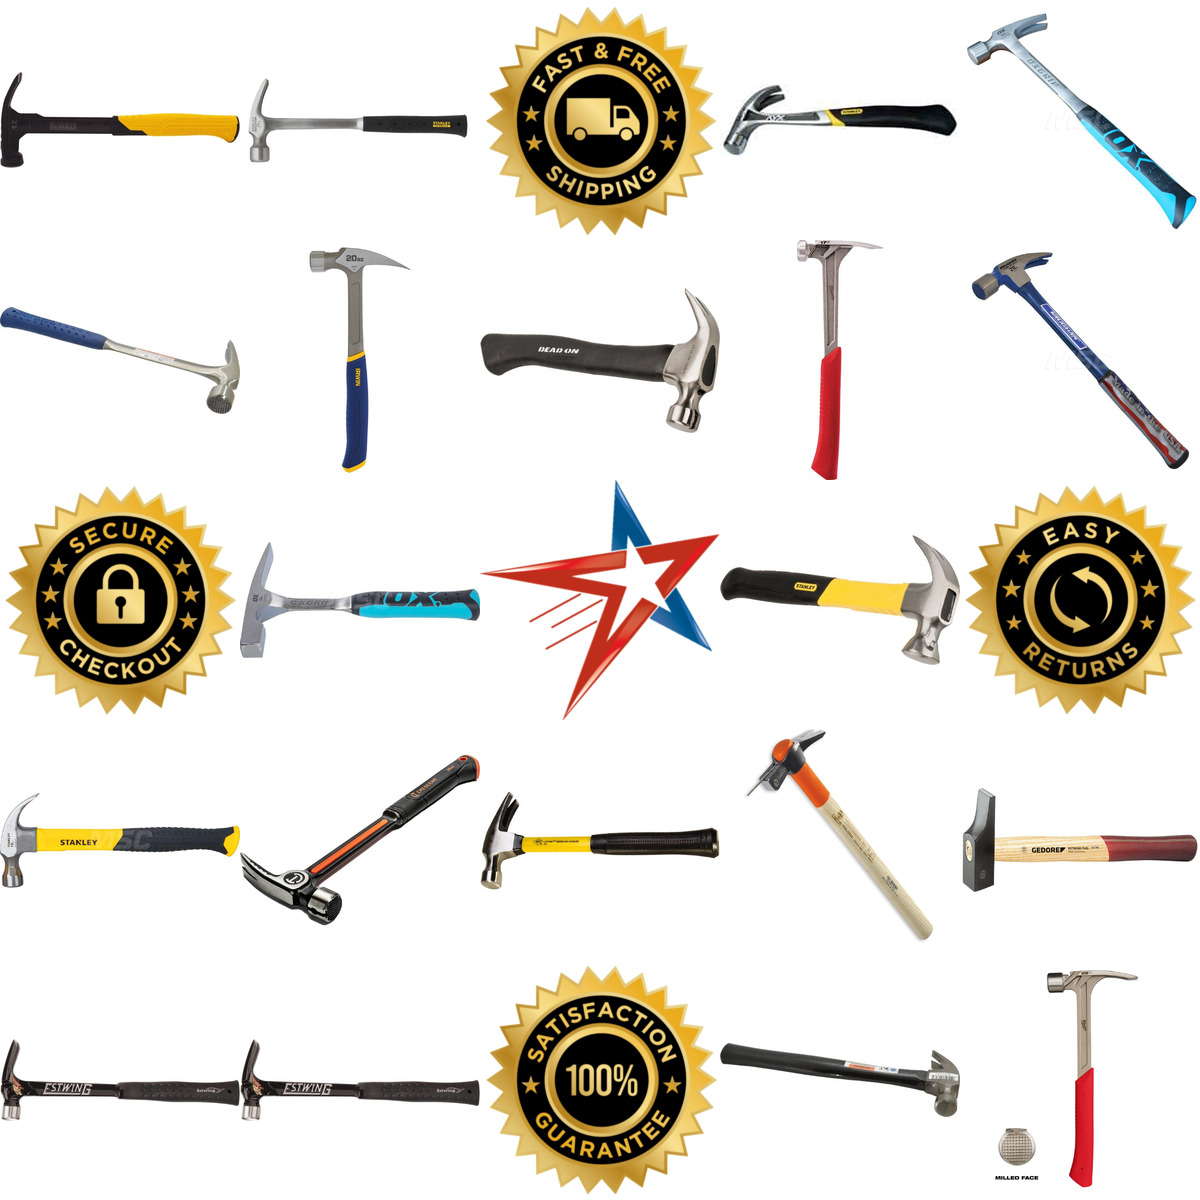 A selection of Nail and Framing Hammers products on GoVets